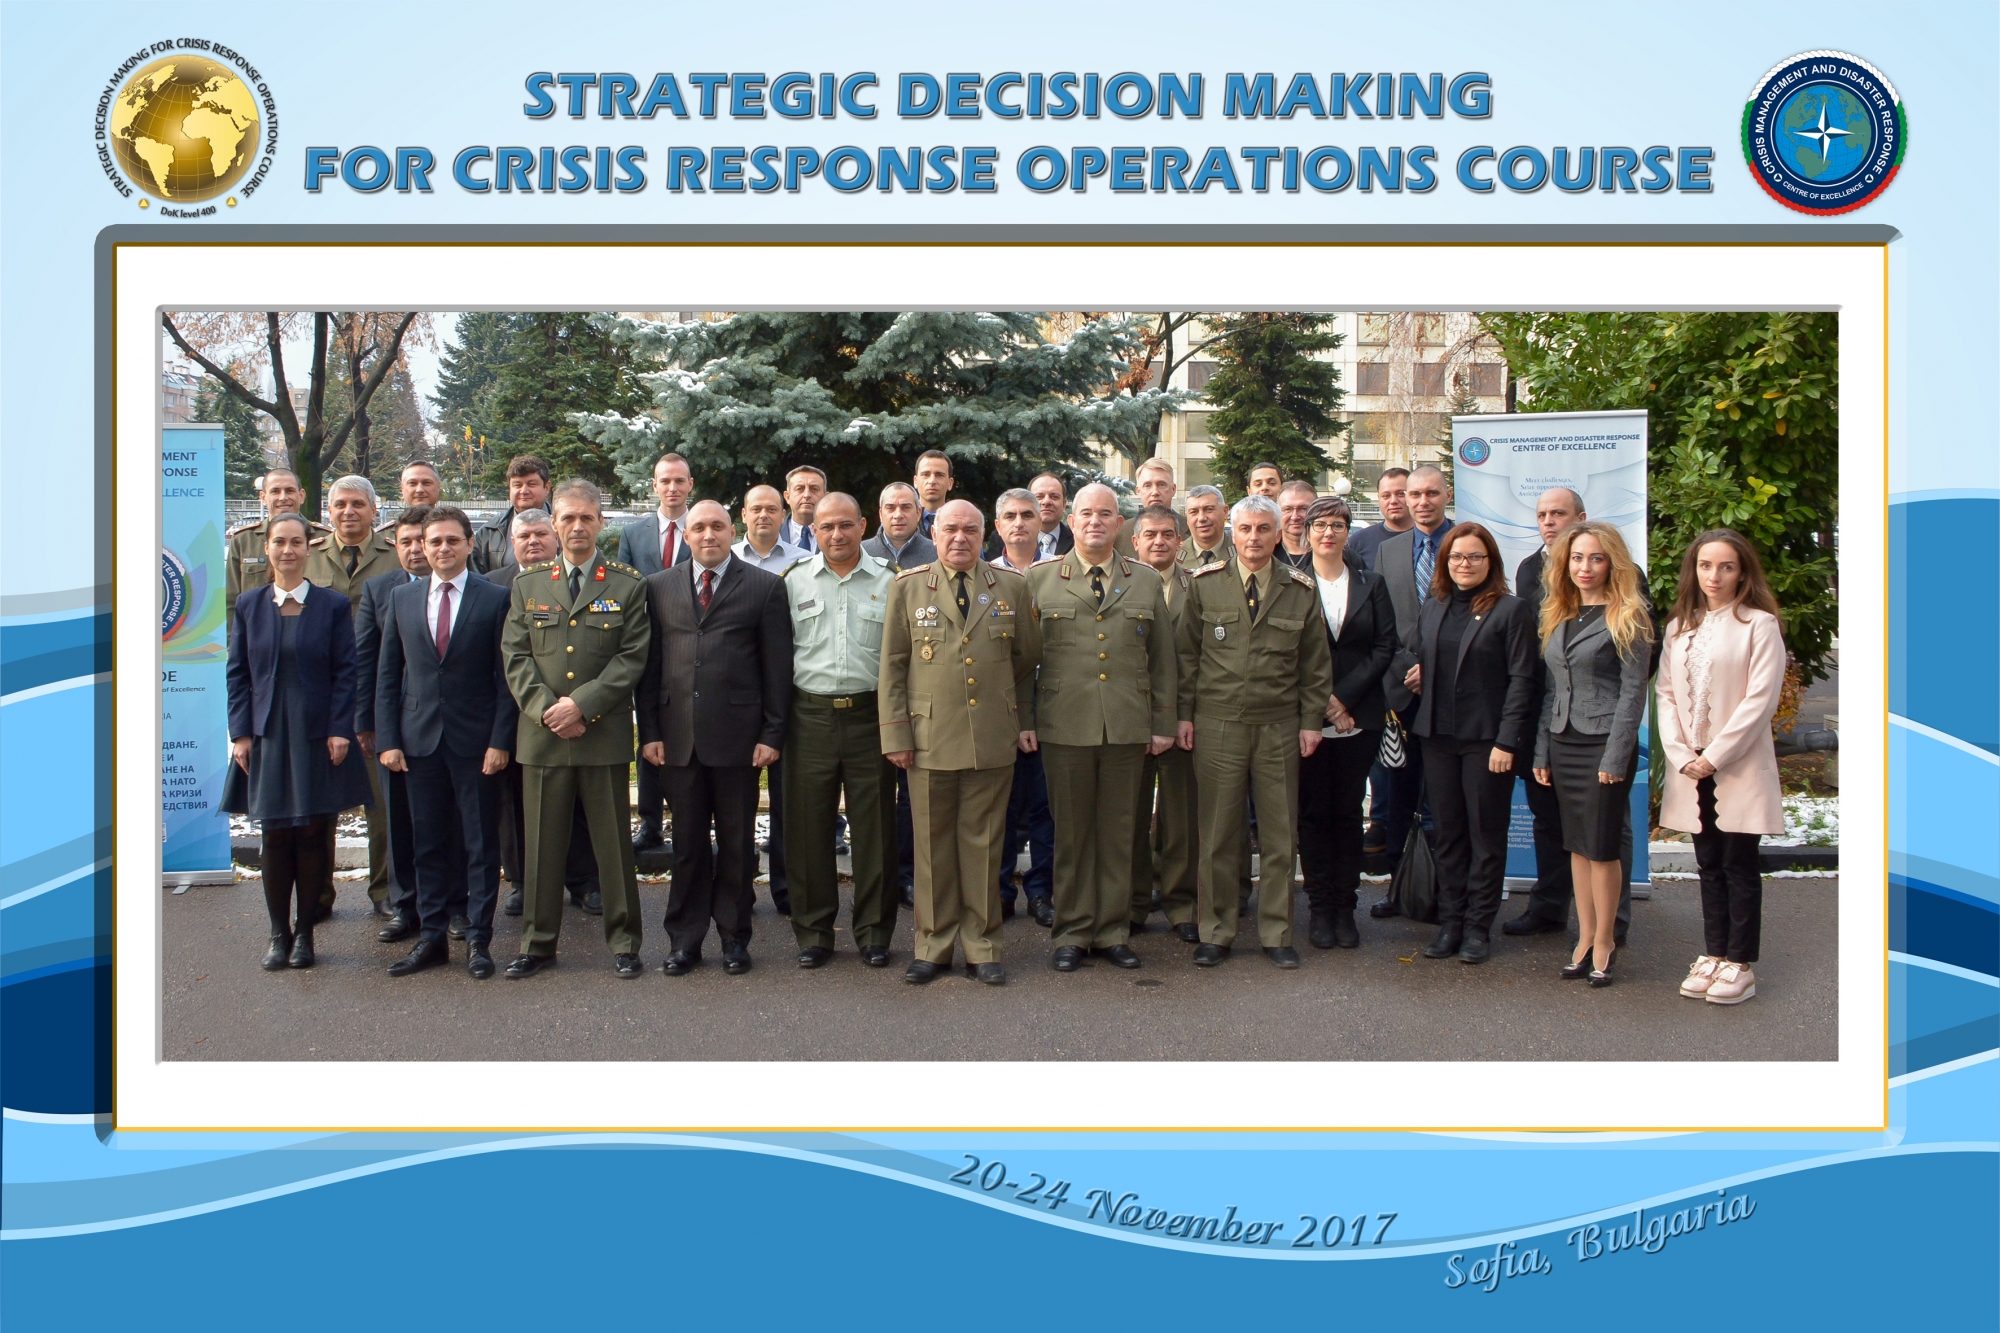 Strategic Decision Making for Crisis Response Operations Course successfully conducted